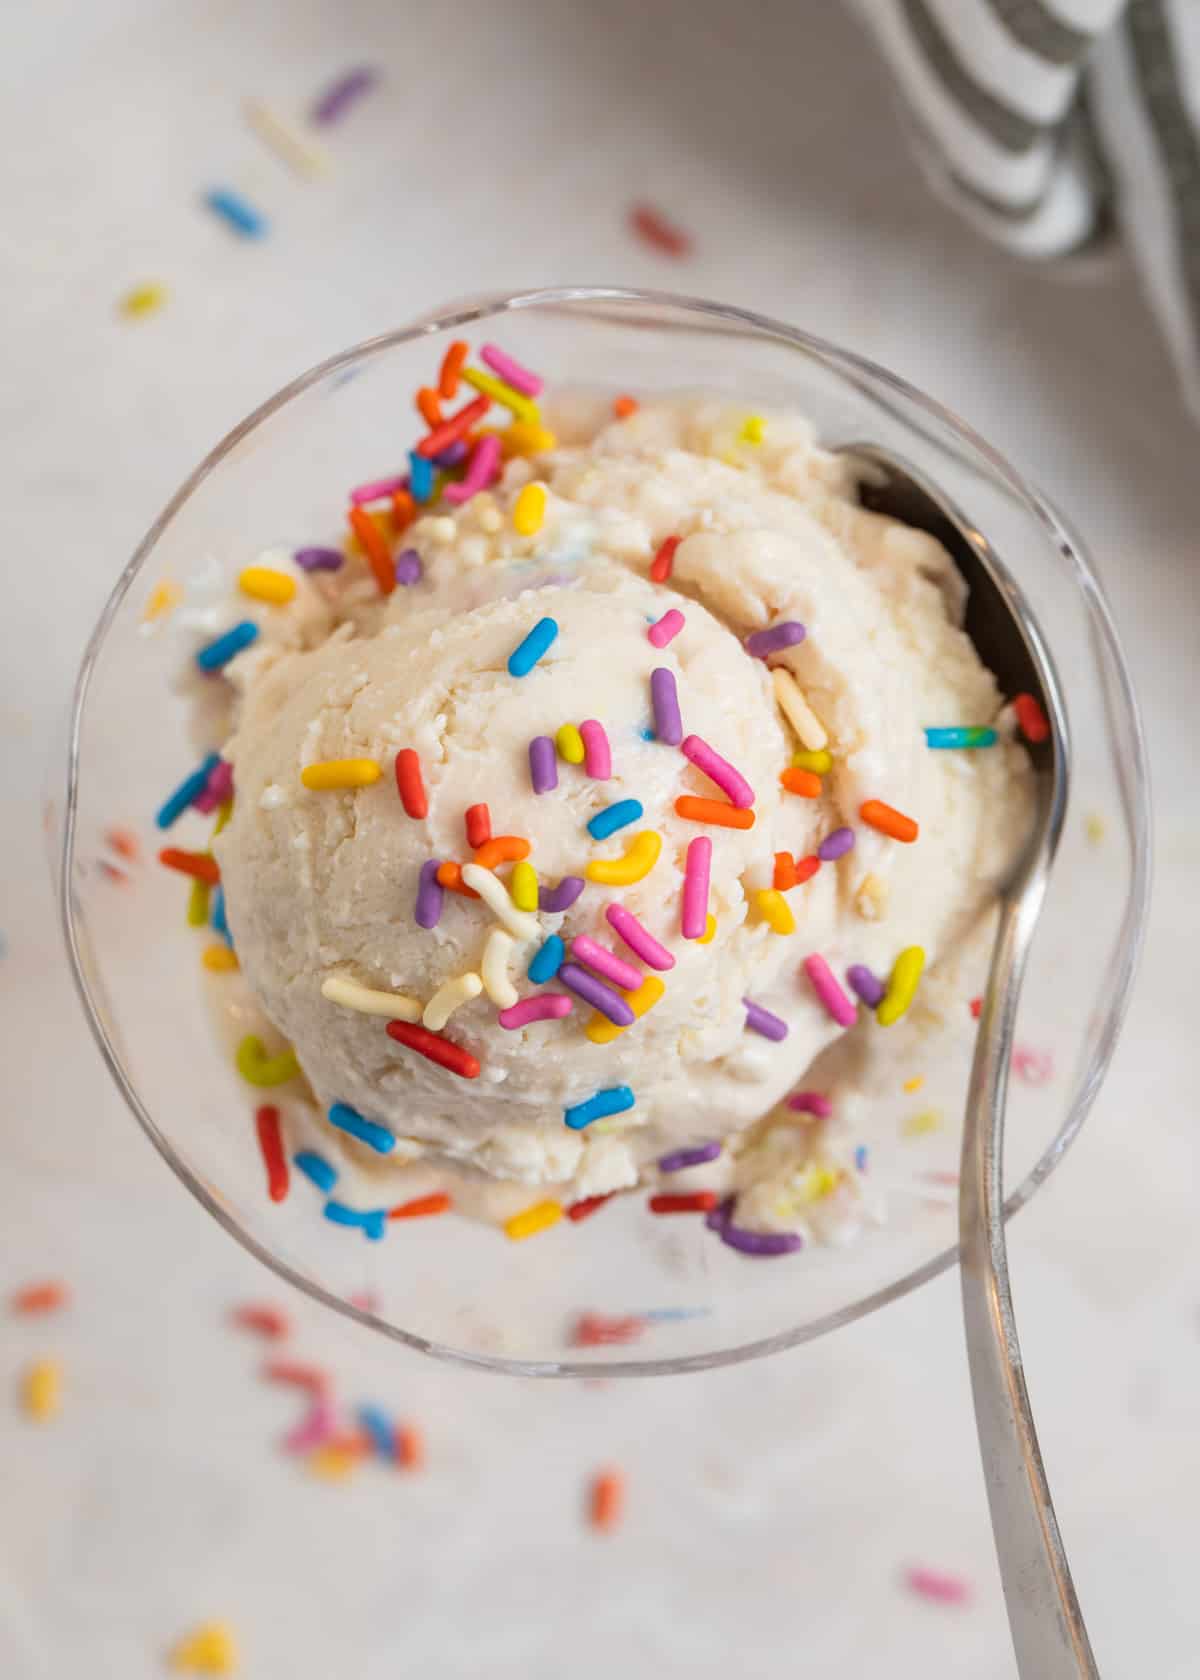 Cottage cheese ice cream scooped in glass dish with sprinkles on top and spoon scooping in.